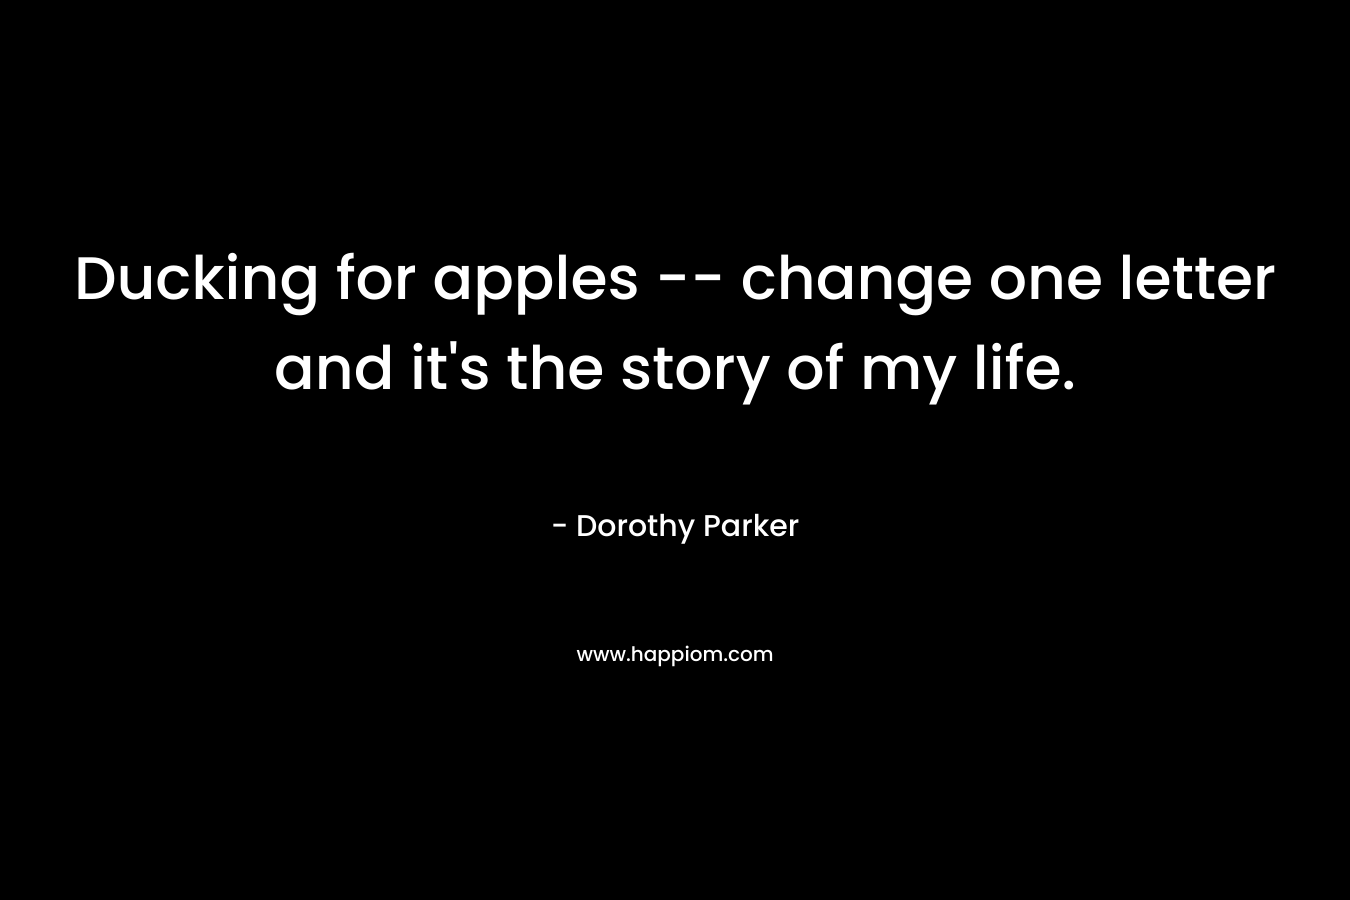 Ducking for apples -- change one letter and it's the story of my life.